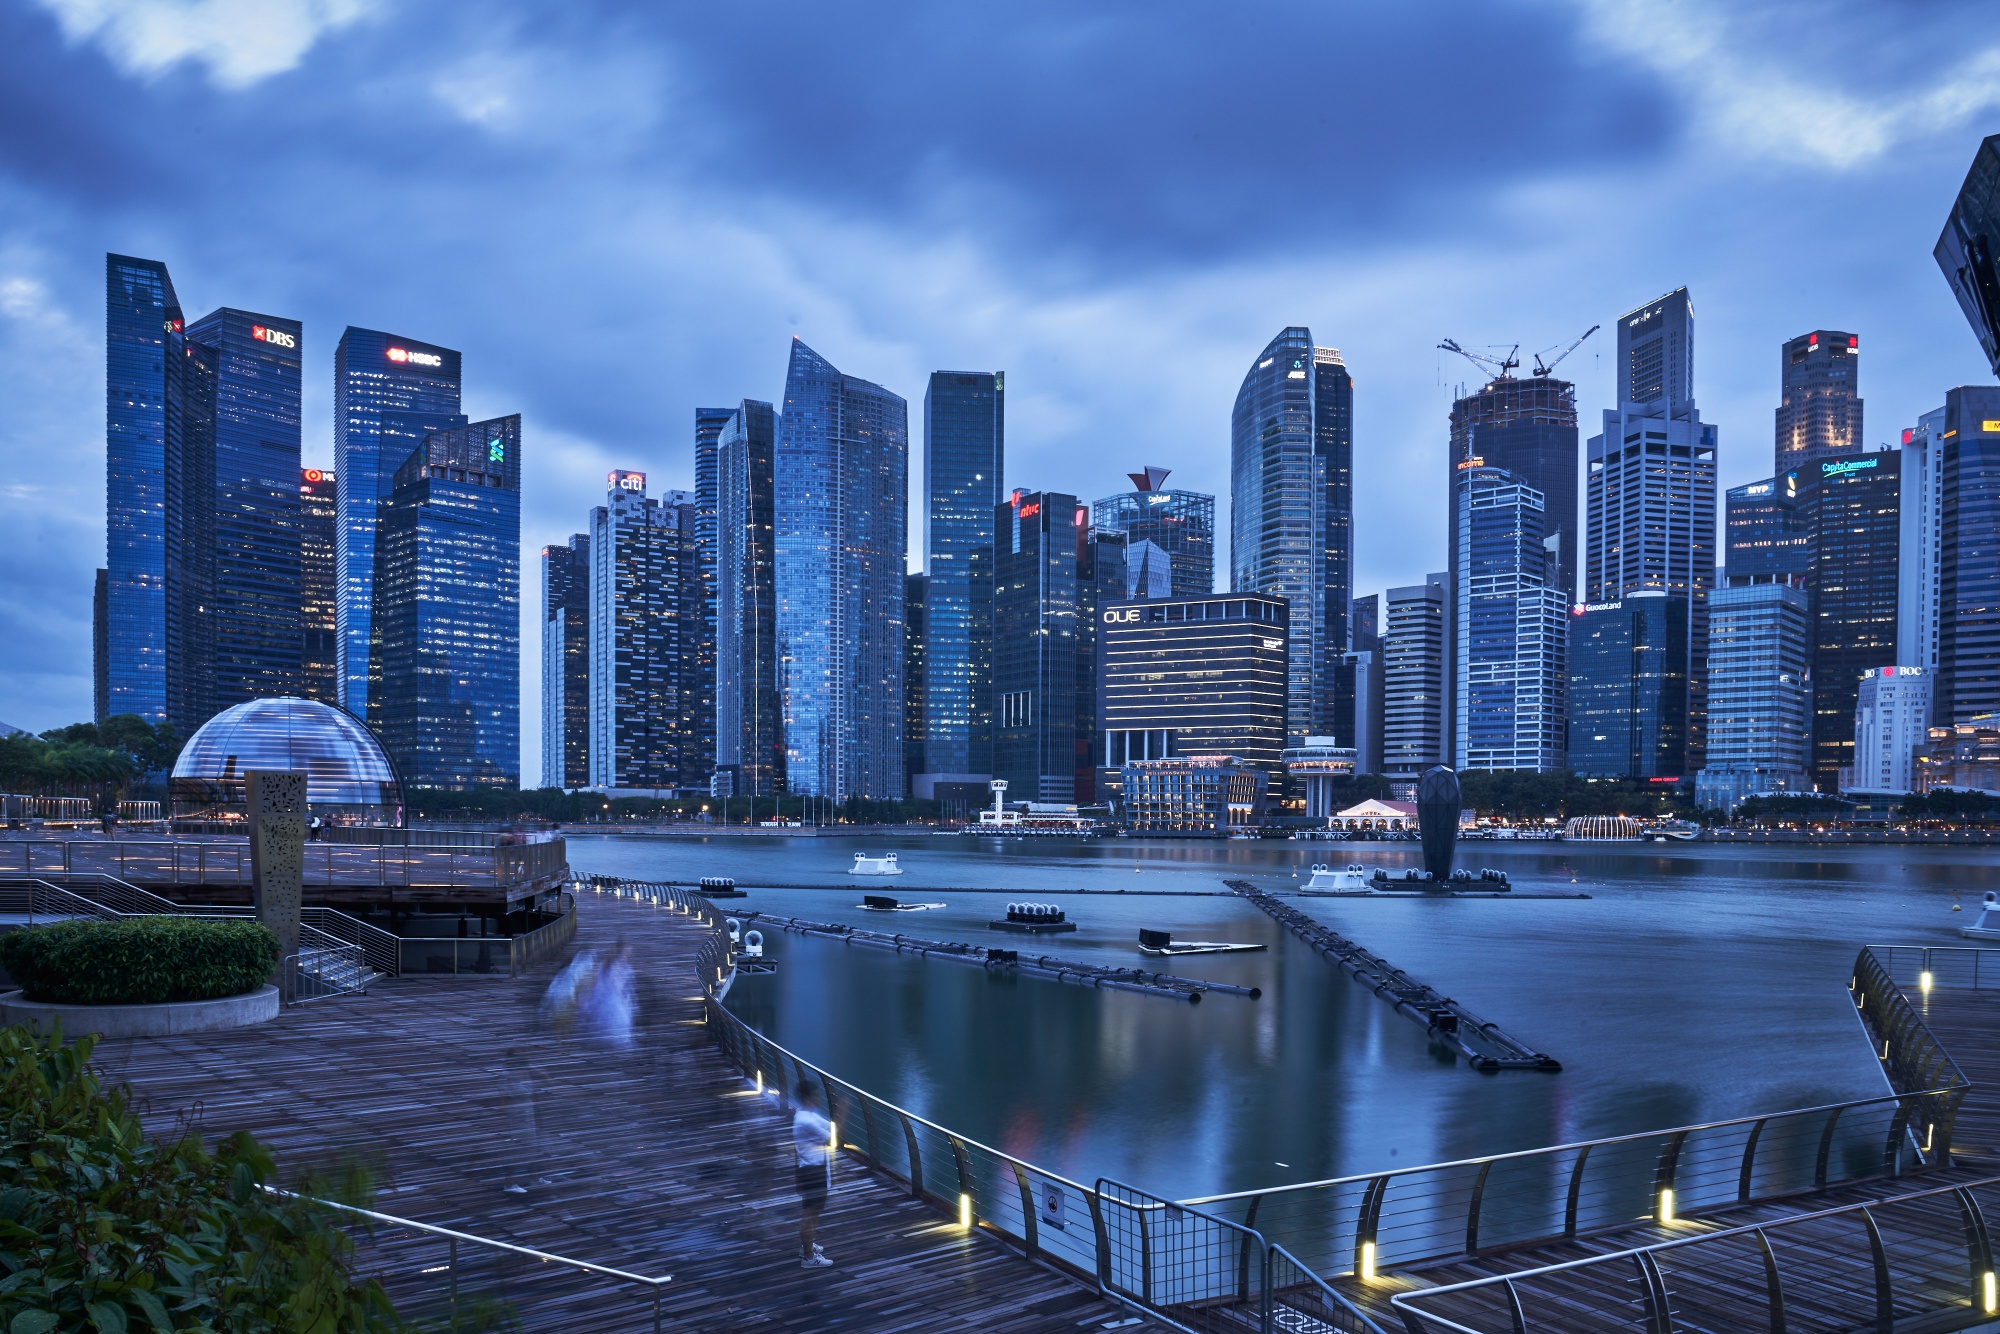 The central business district (CBD) of Singapore.